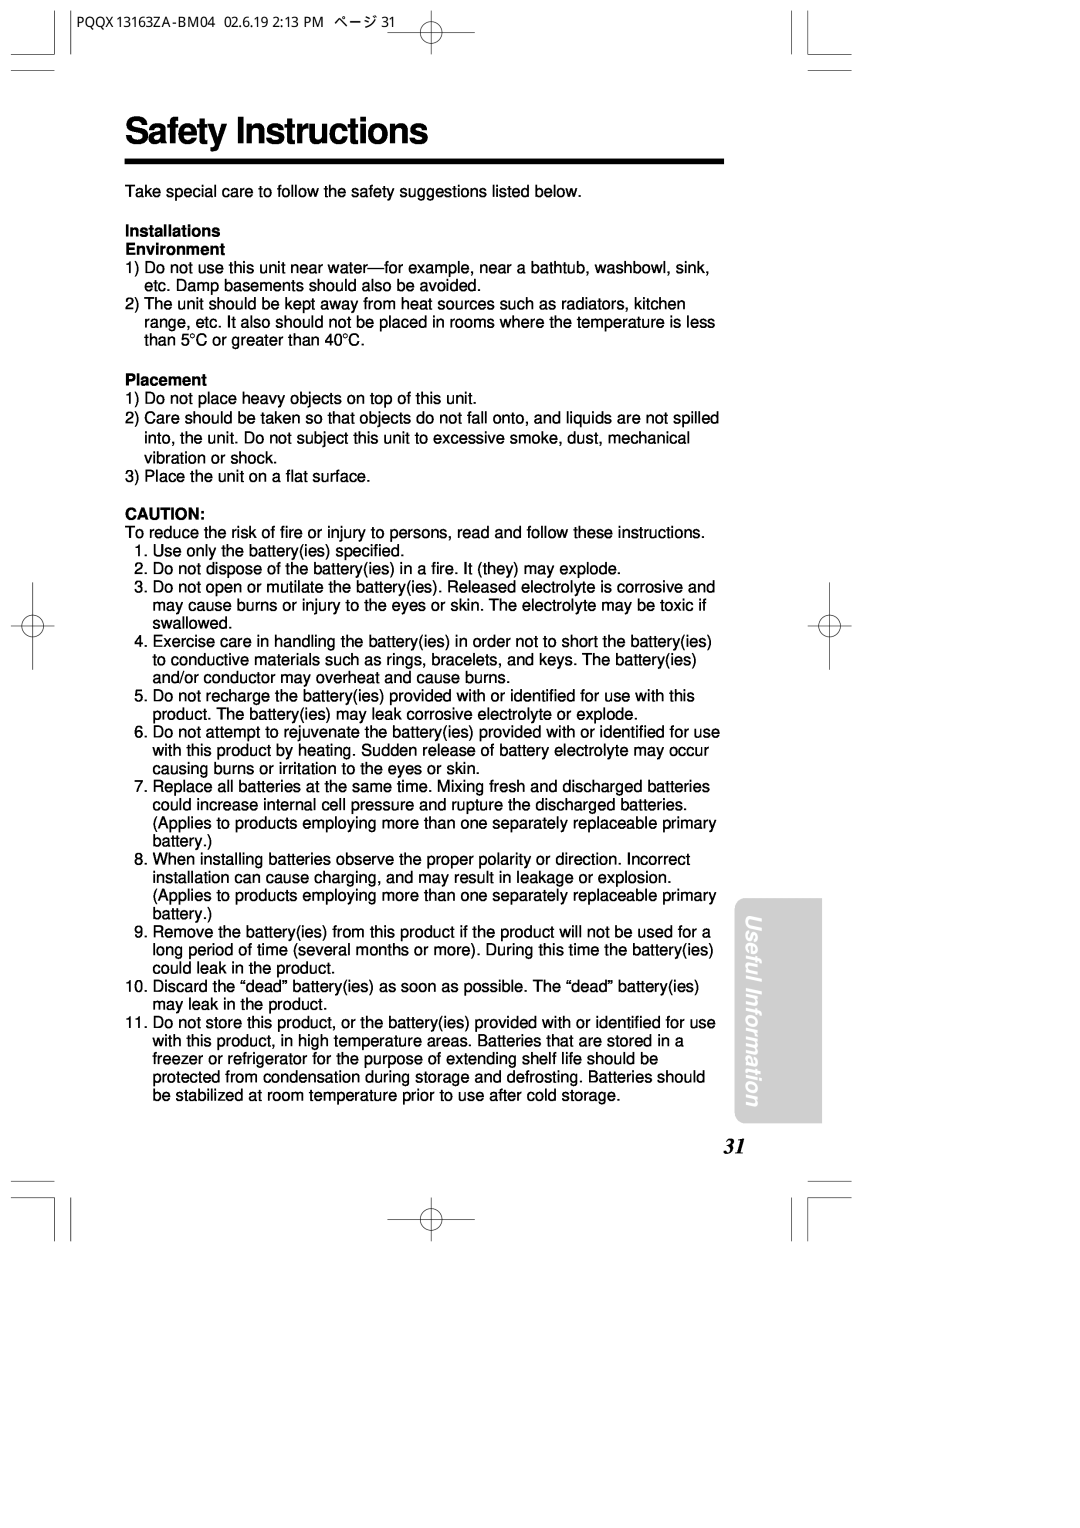 Panasonic KX-T2375SUW operating instructions Safety Instructions, Useful Information, Installations Environment, Placement 